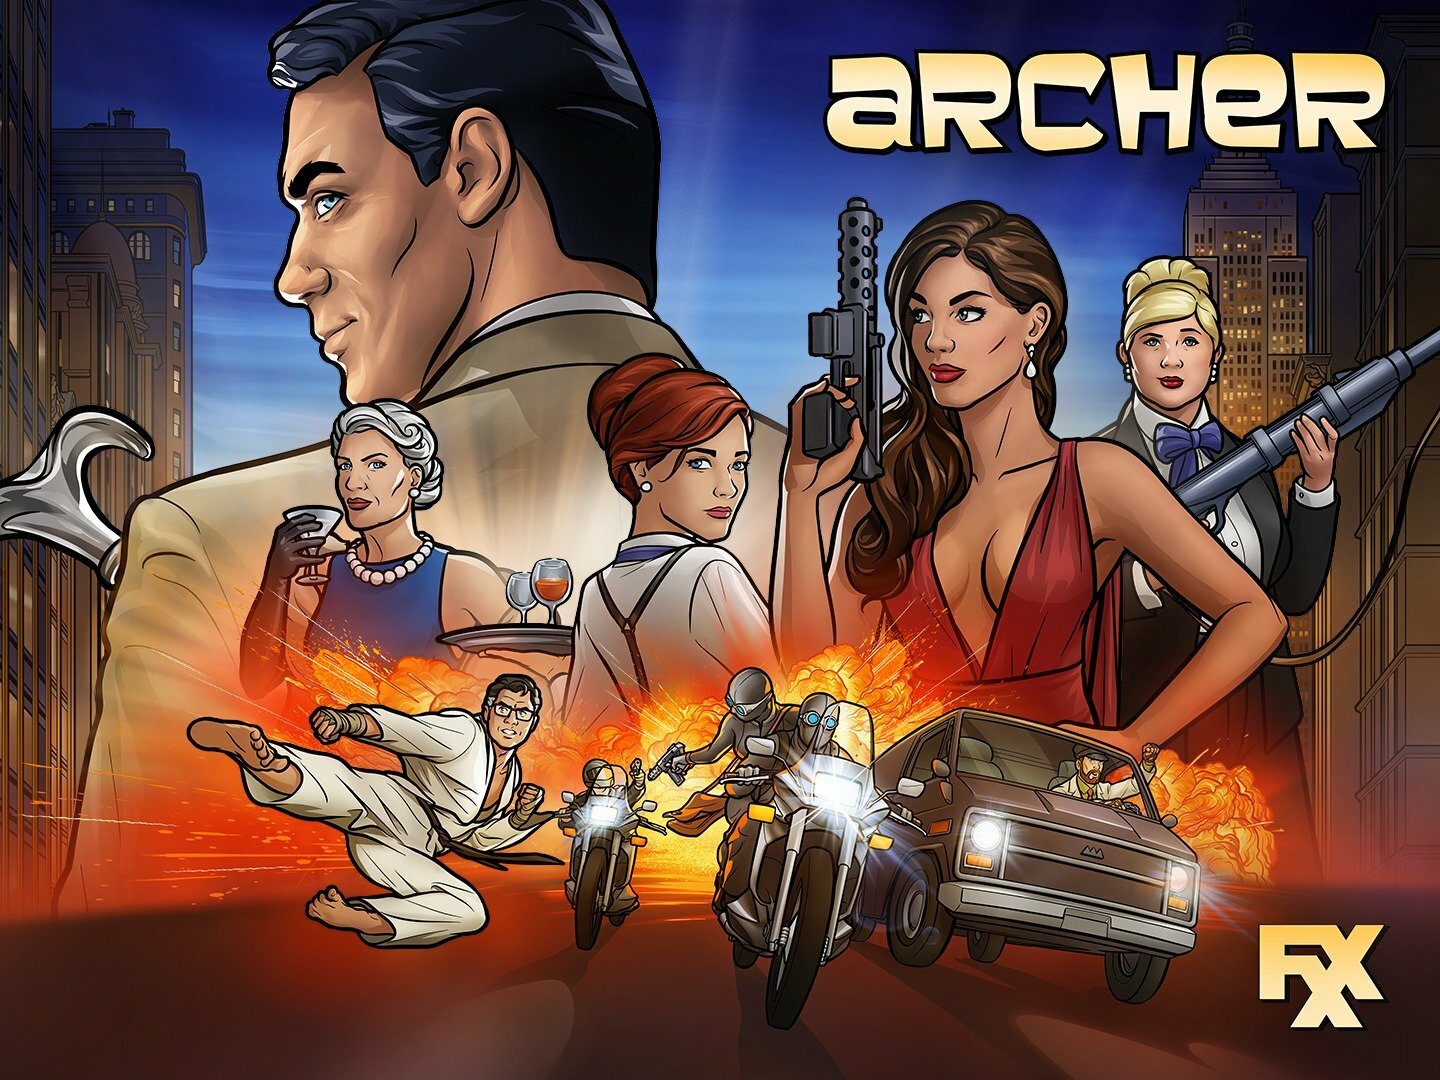 Archer : The Famous Spy Comedy Series Returning with Season 13 Next Year.